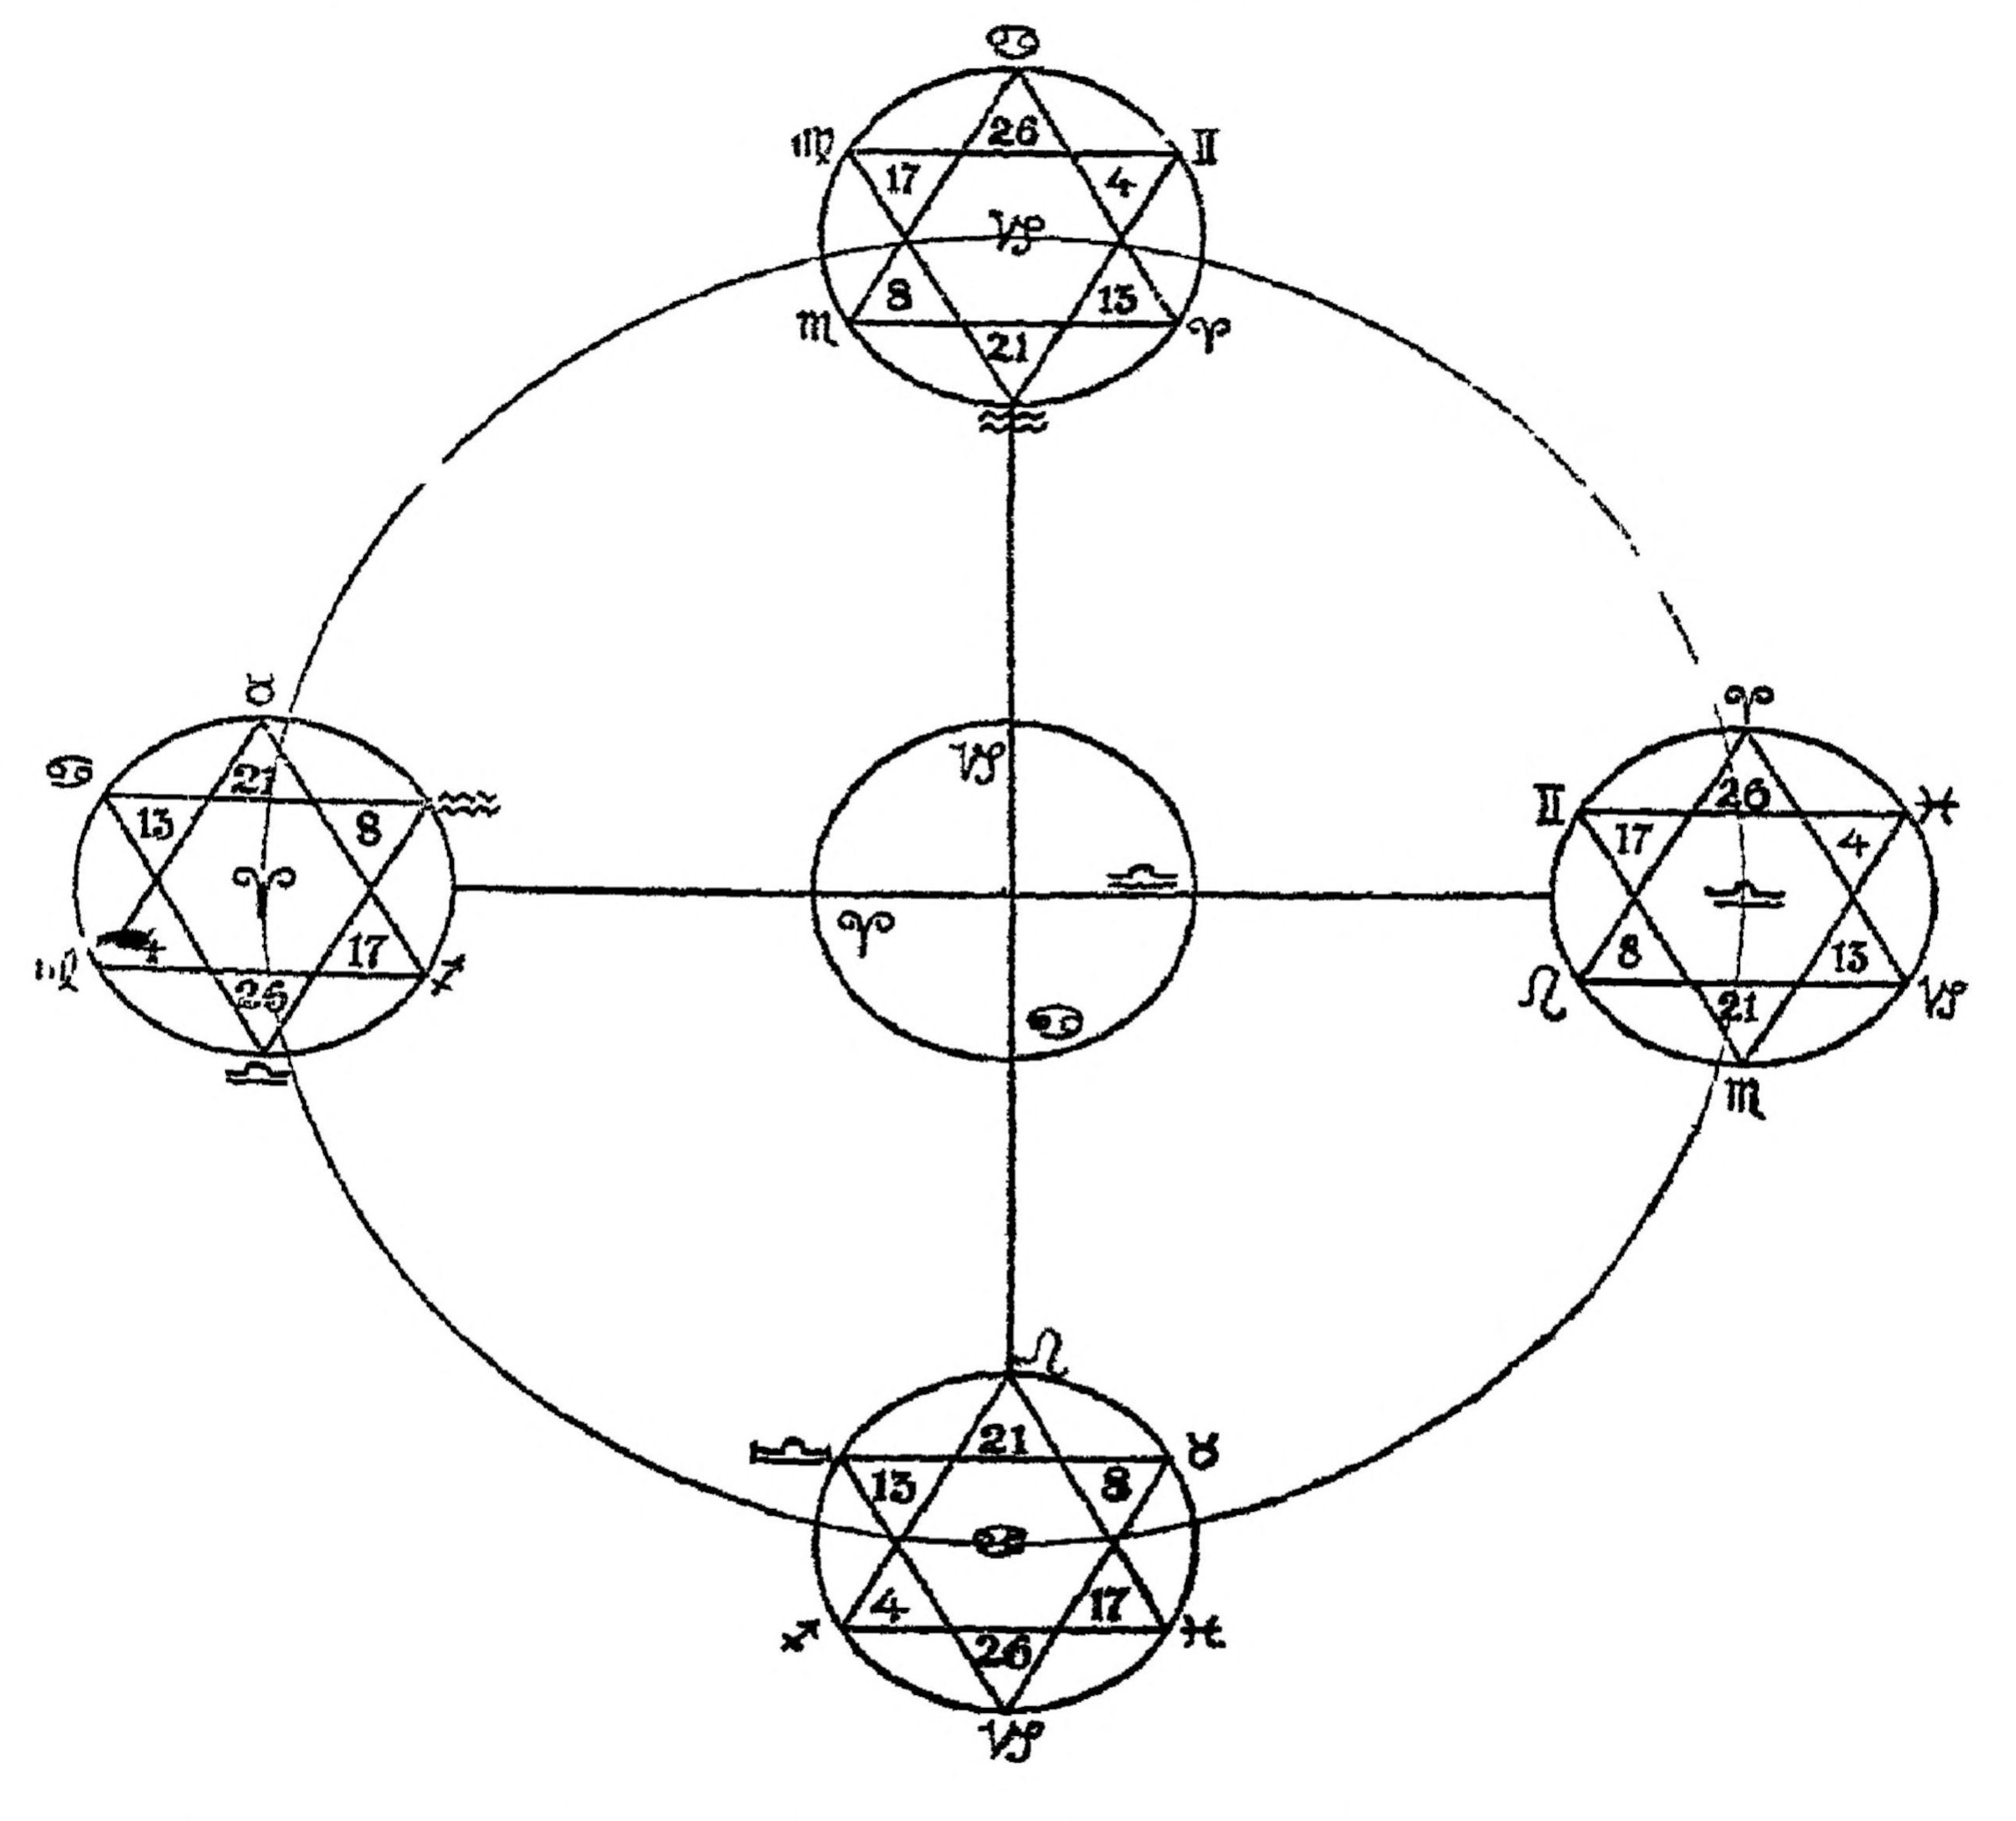 Figure 30. Diagram of the Cosmic Star. Showing the generation of the Sex Degrees of the Zodiac from the Four Cardinal Points.